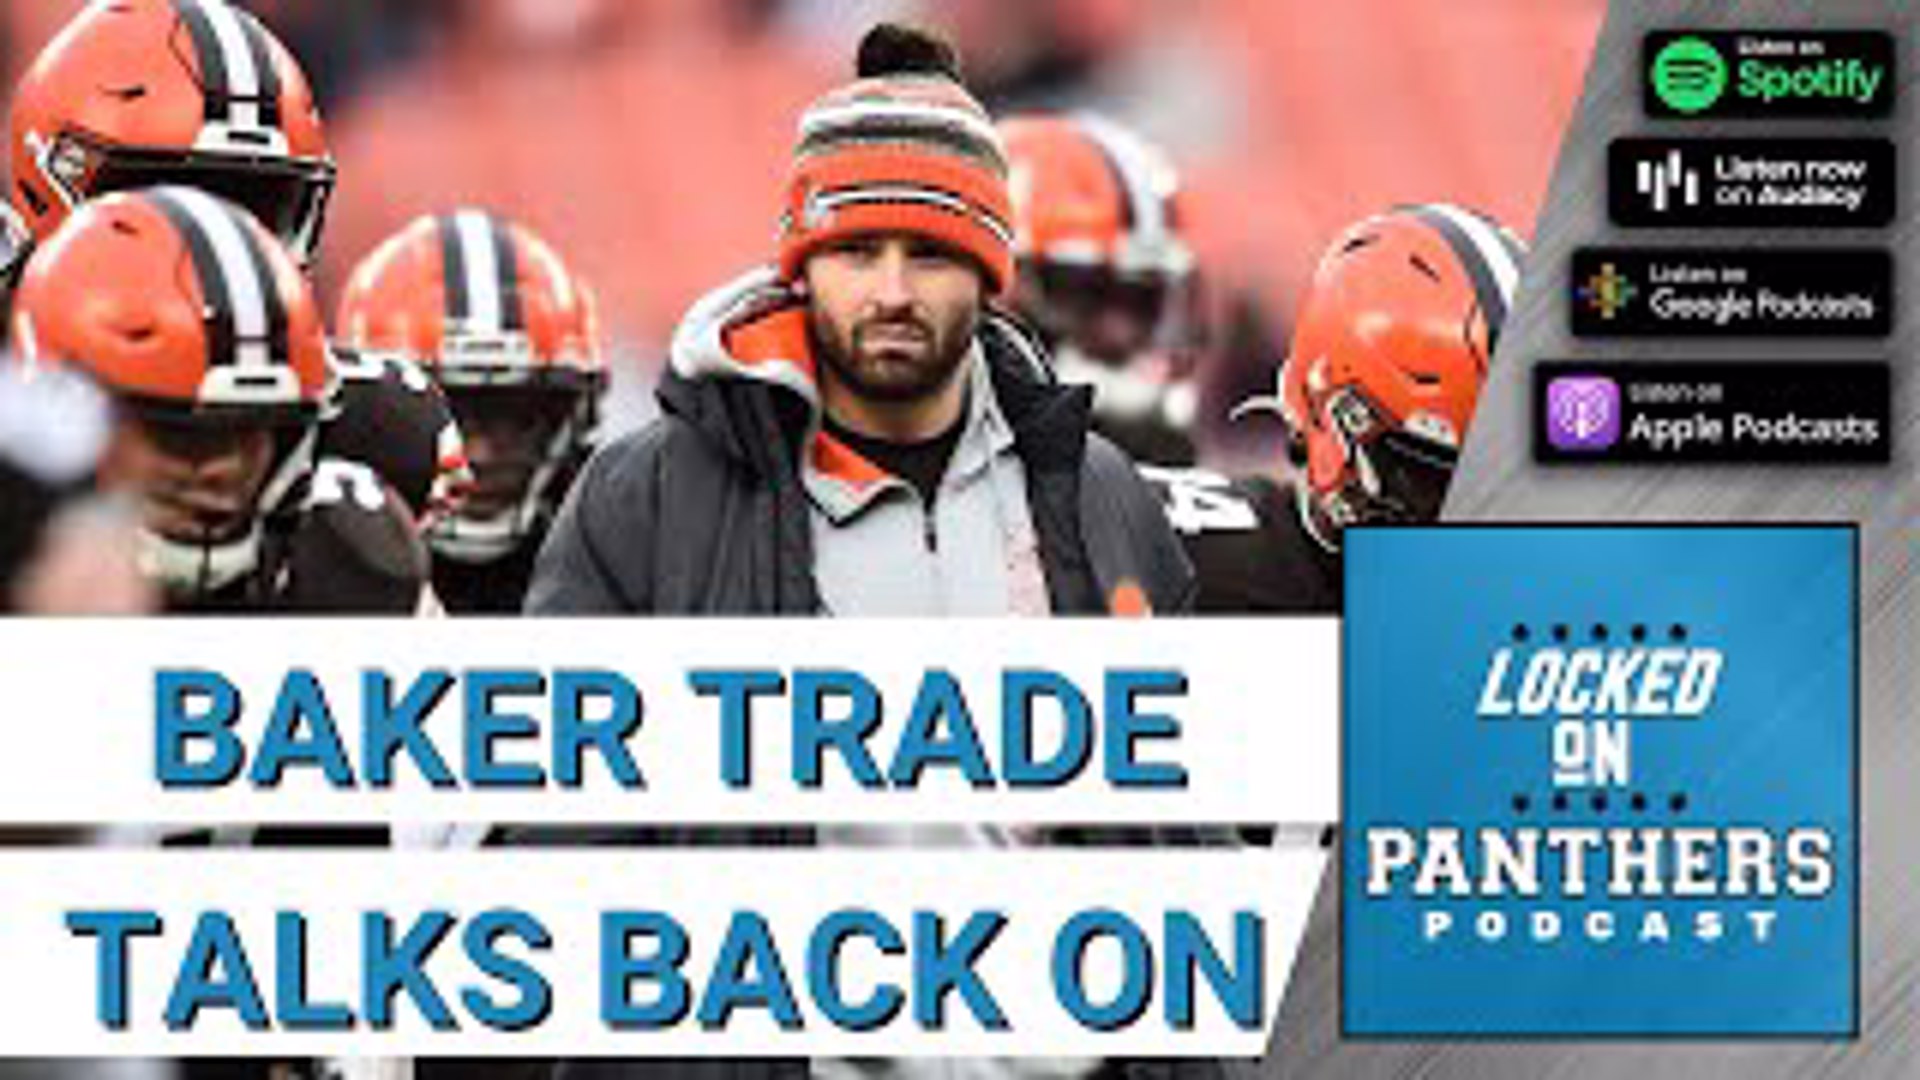 Jonathan Jones, with CBS Sports, reported on Twitter that trade talks between the Panthers and Browns on Baker Mayfield are back on, with salary being the big hurdle